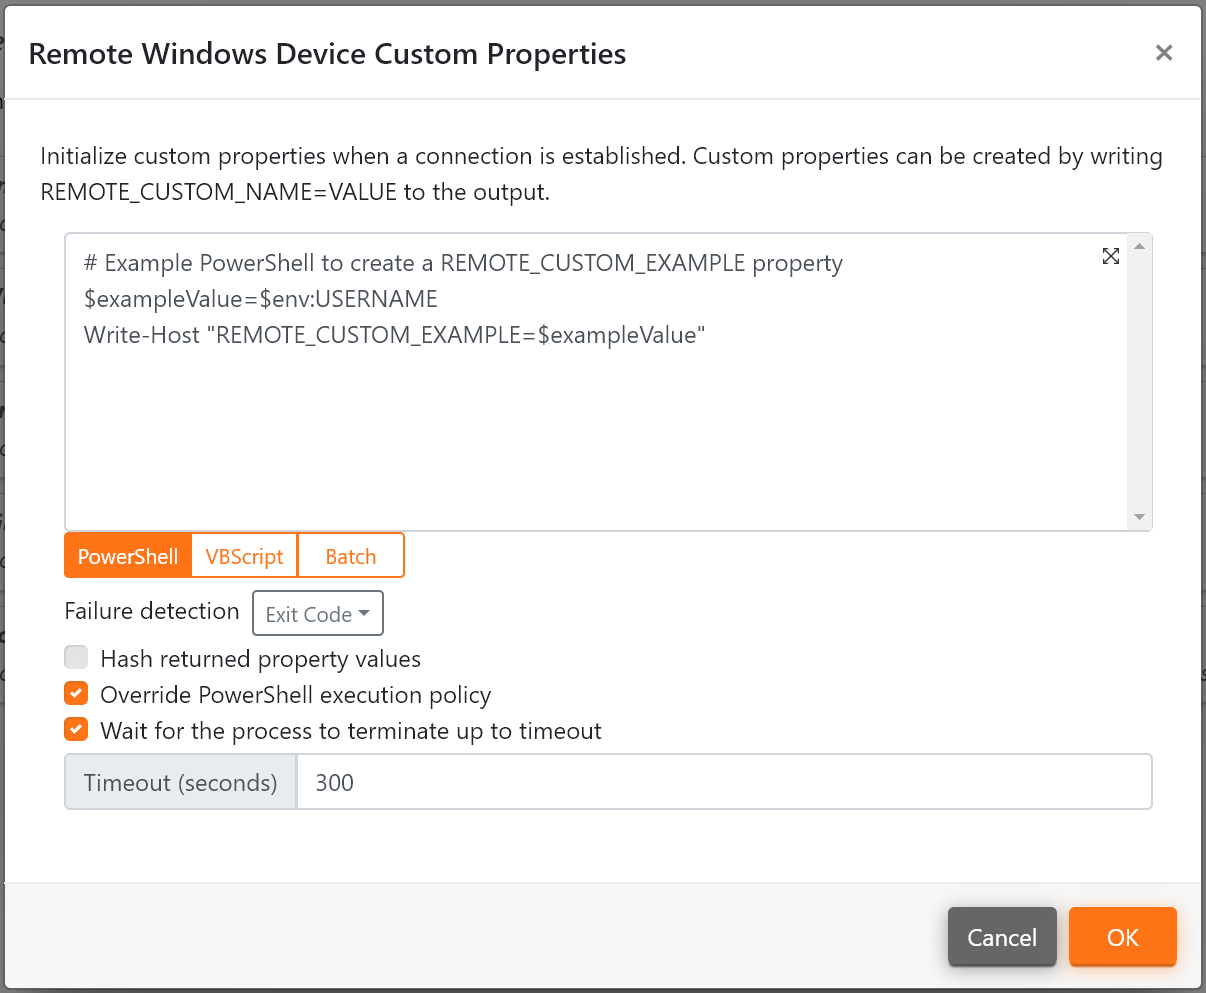 Custom Properties for the Remote Windows Device.